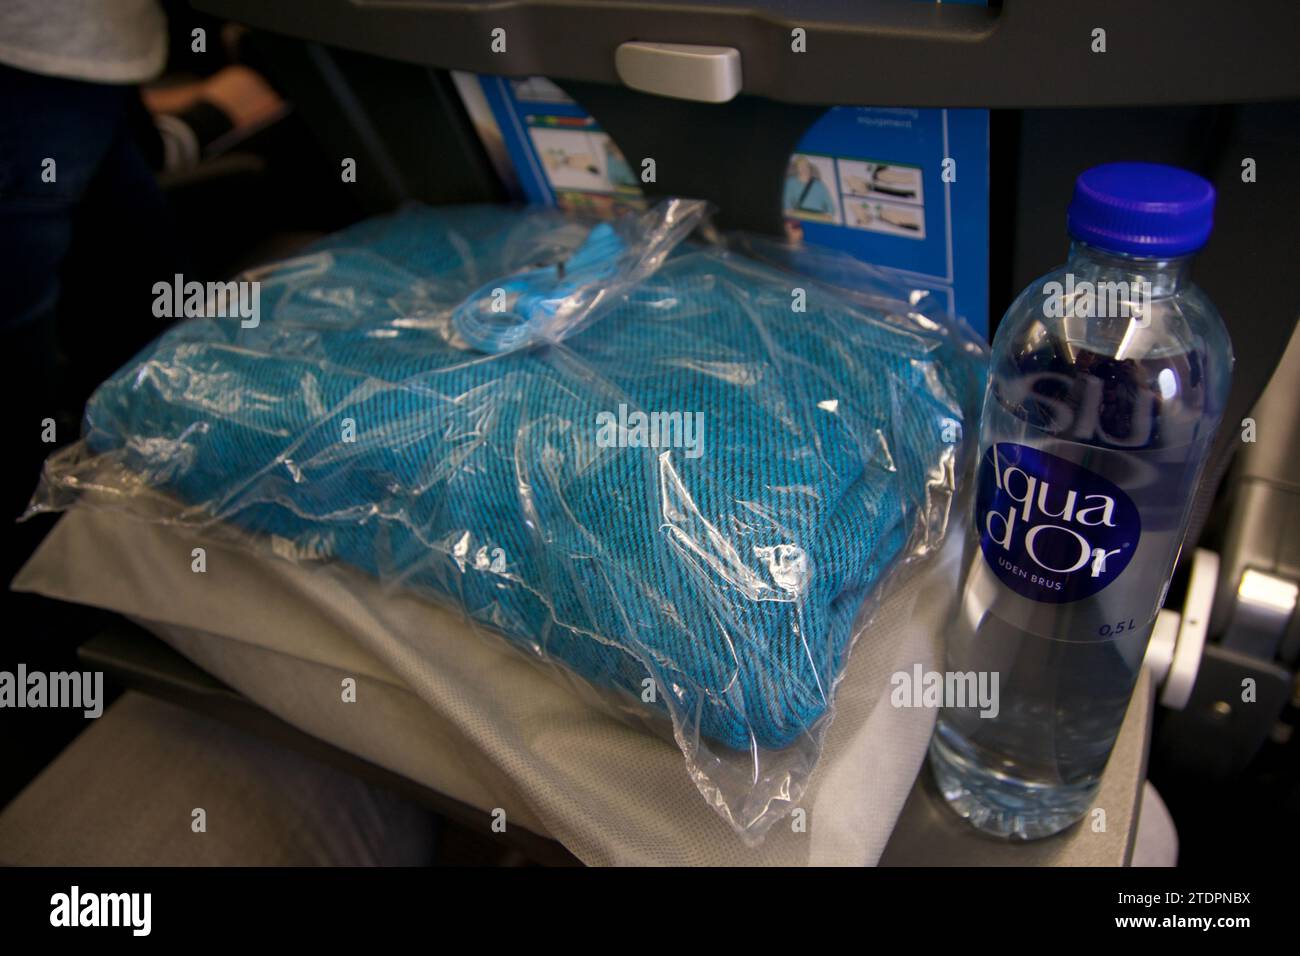 KOPENHAGEN, DENMARK - NOV 24, 2018: Amenities such as a blanket, pillow and a bottle of water in Economy Class on a long-haul flight to San Francisco Stock Photo